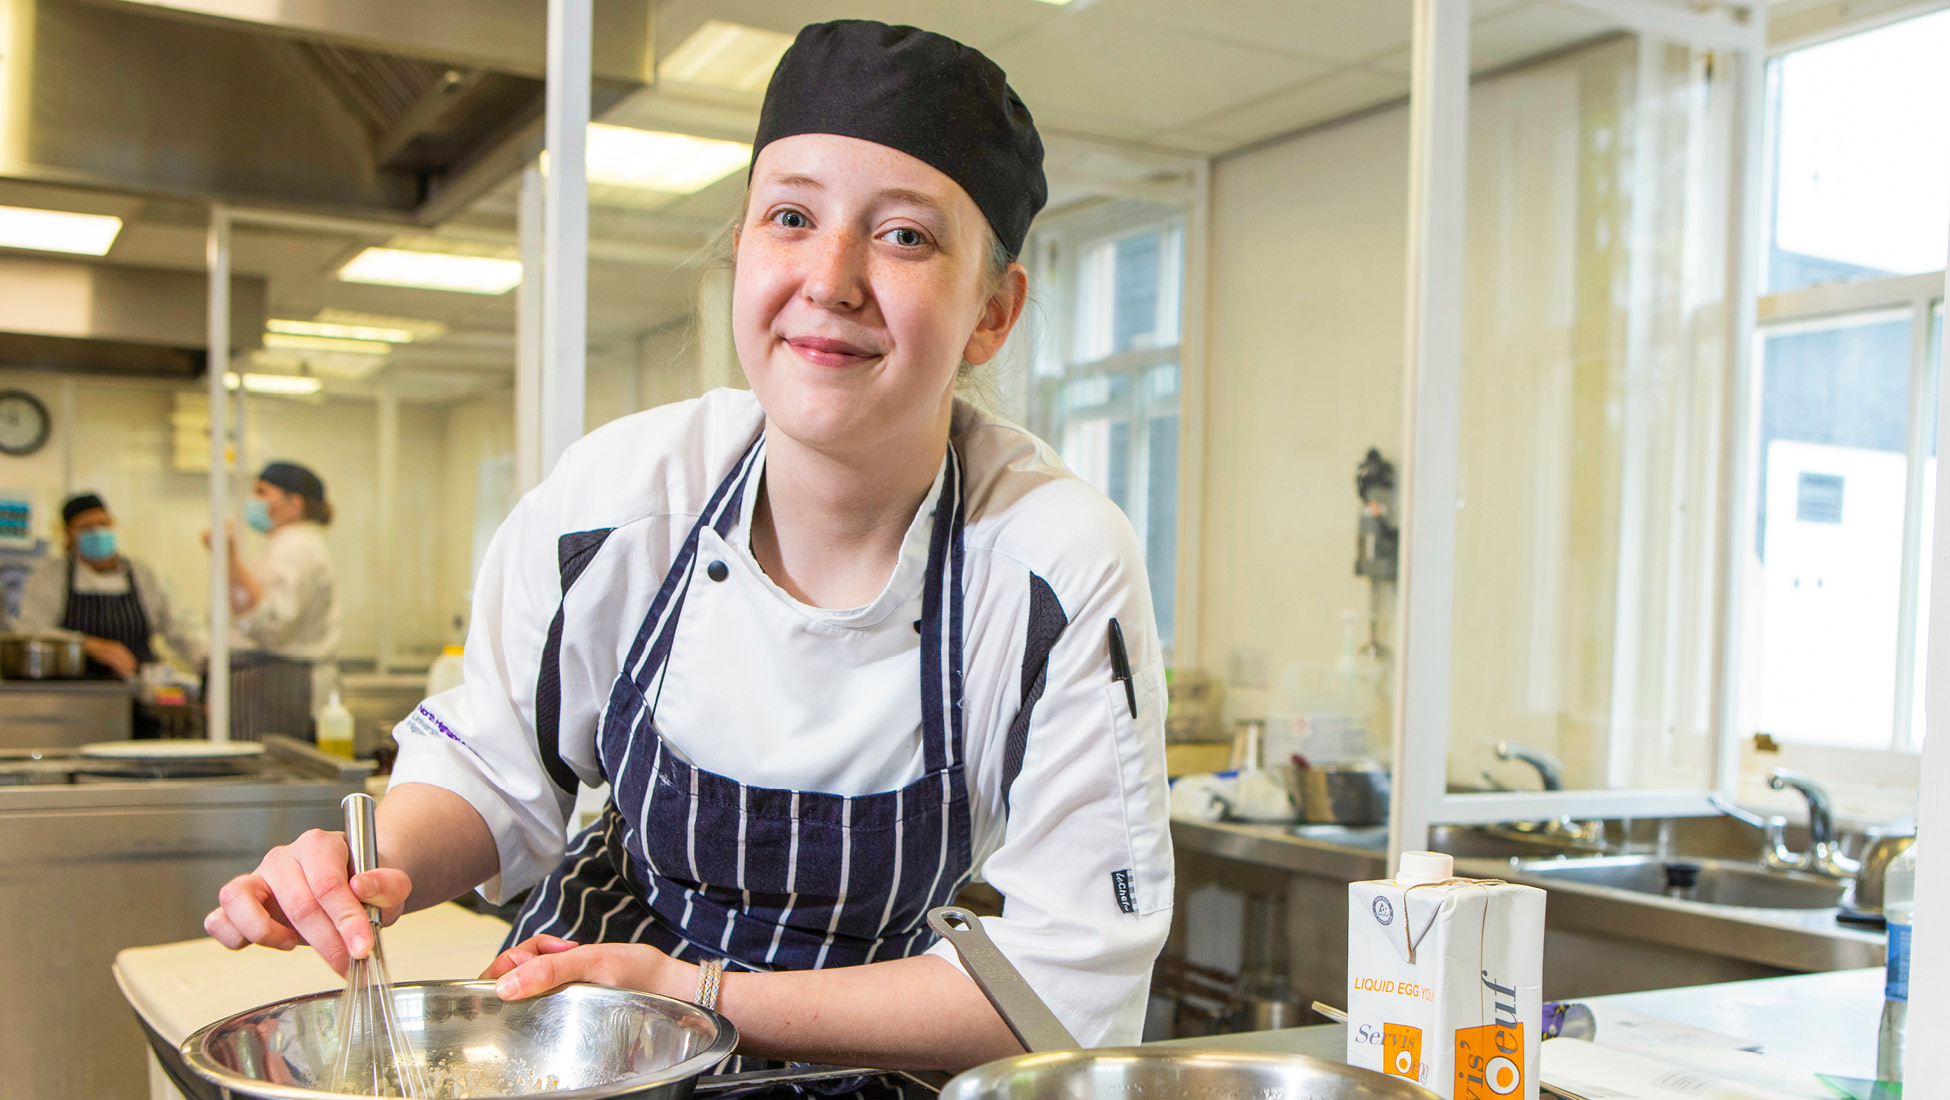 Cookery Student stirring whilst looking at camera